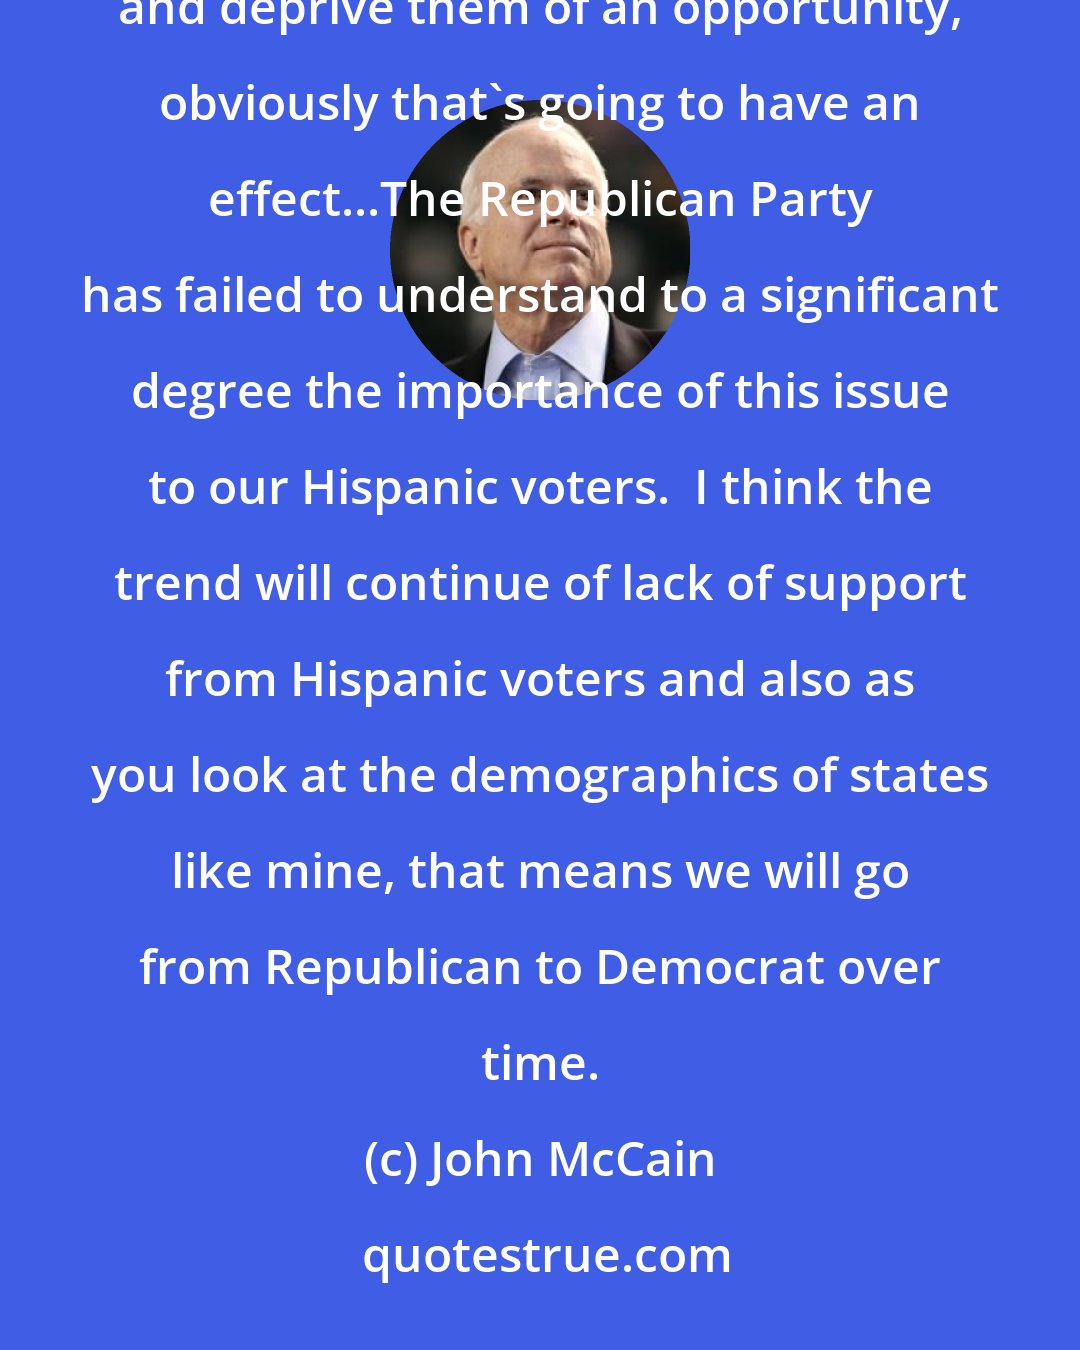 John McCain: If you have a large bloc of Americans who believe you're trying to keep their ... fellow Hispanics down and deprive them of an opportunity, obviously that's going to have an effect...The Republican Party has failed to understand to a significant degree the importance of this issue to our Hispanic voters.  I think the trend will continue of lack of support from Hispanic voters and also as you look at the demographics of states like mine, that means we will go from Republican to Democrat over time.